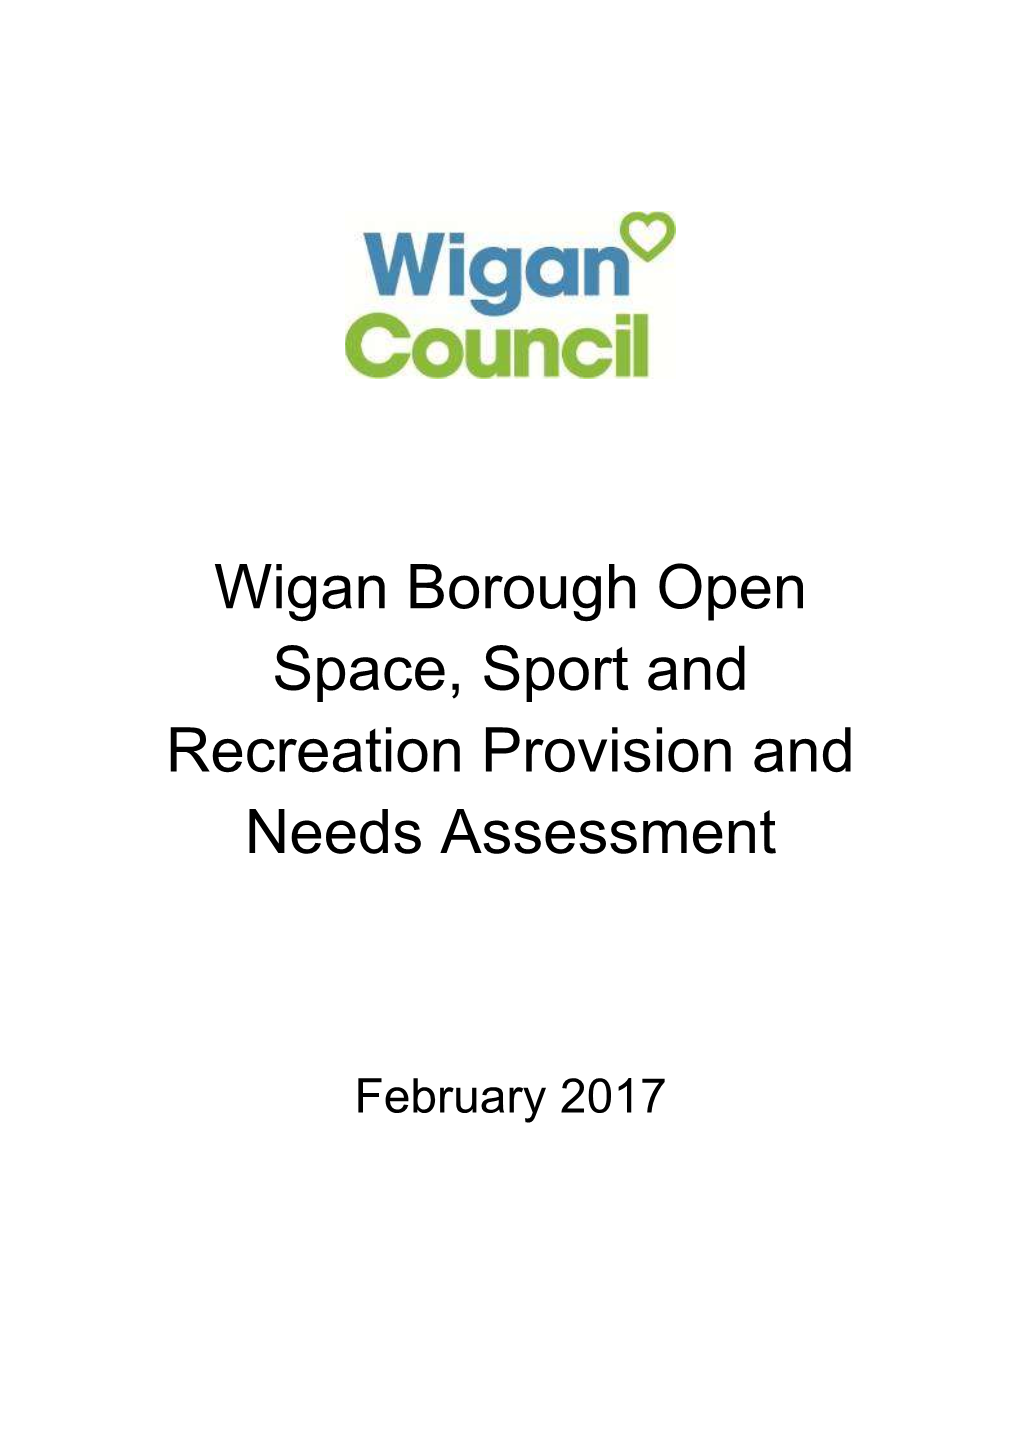 Wigan Borough Open Space, Sport and Recreation Provision and Needs Assessment